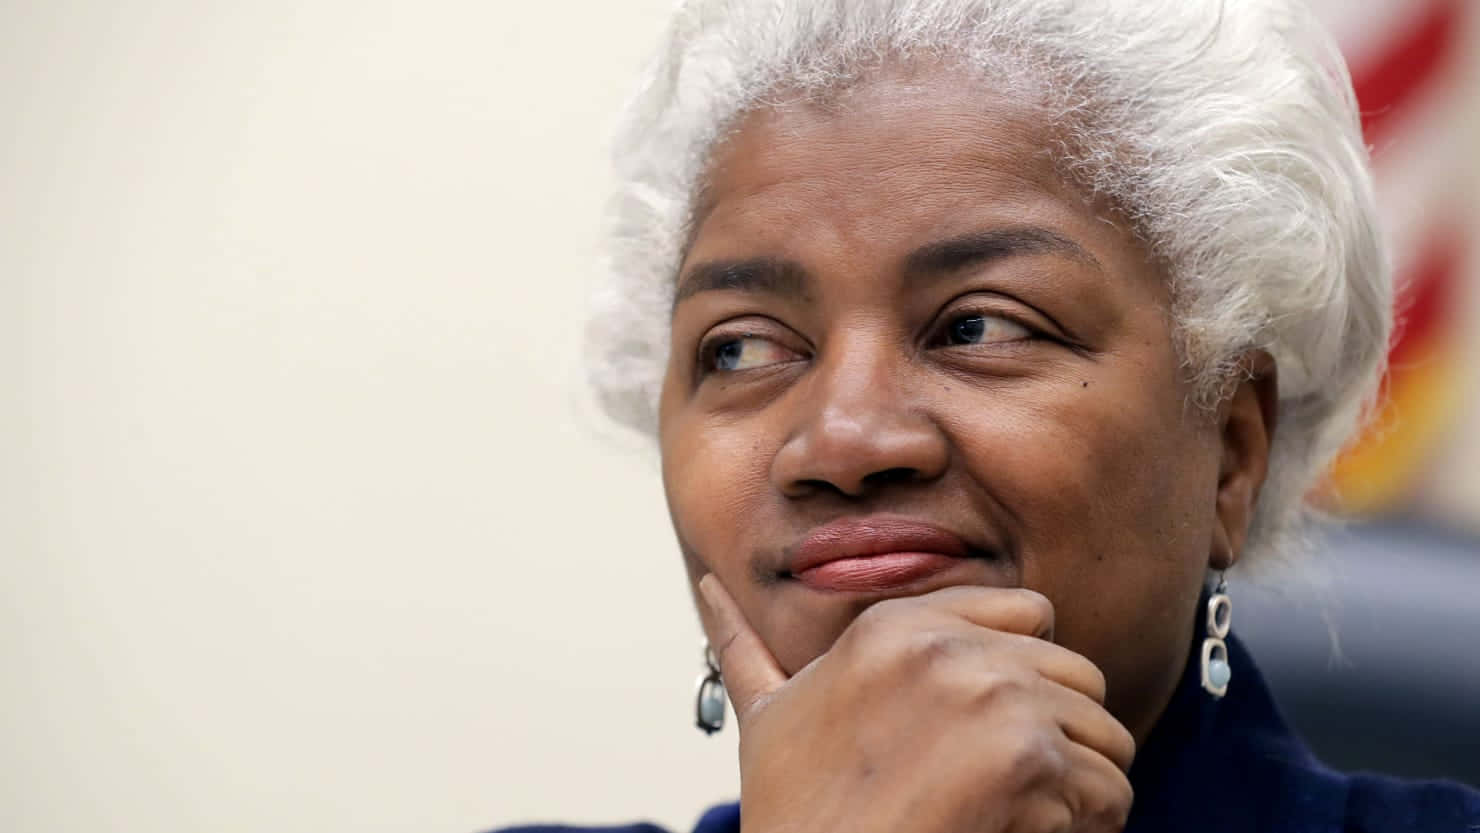 Donna Brazile Speaking At An Event Wallpaper